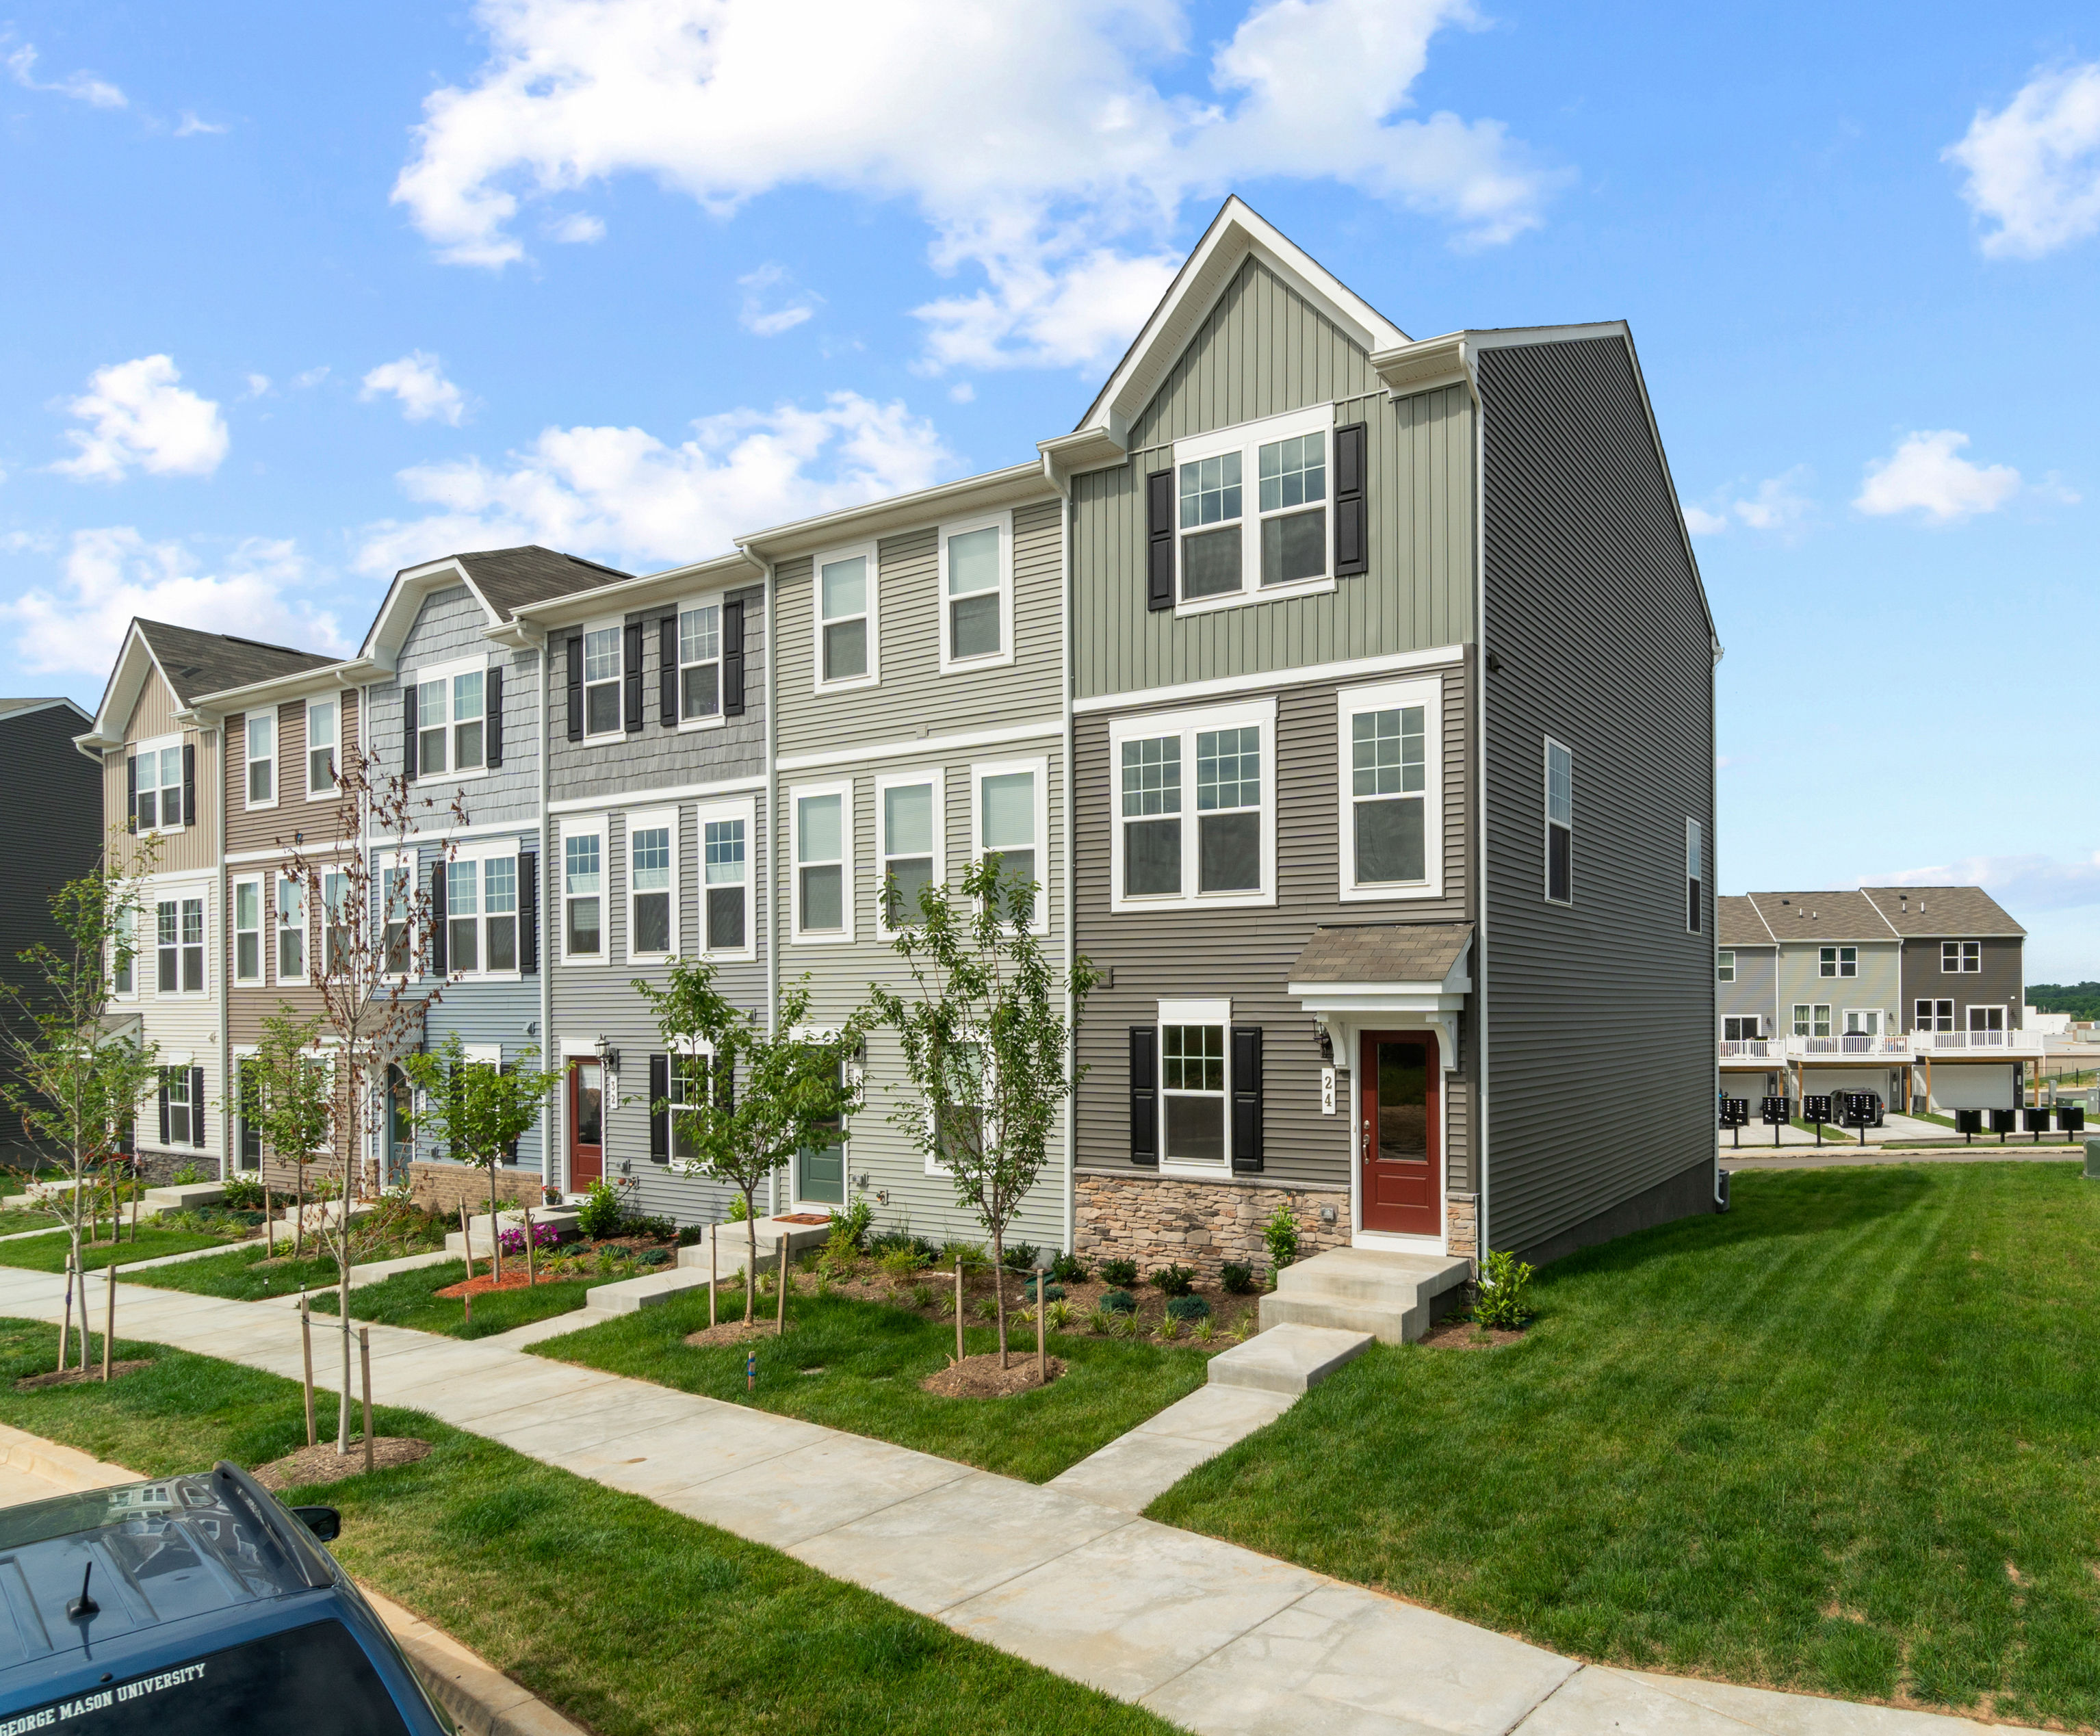 3 Level Garage Townhomes at Presidents Pointe